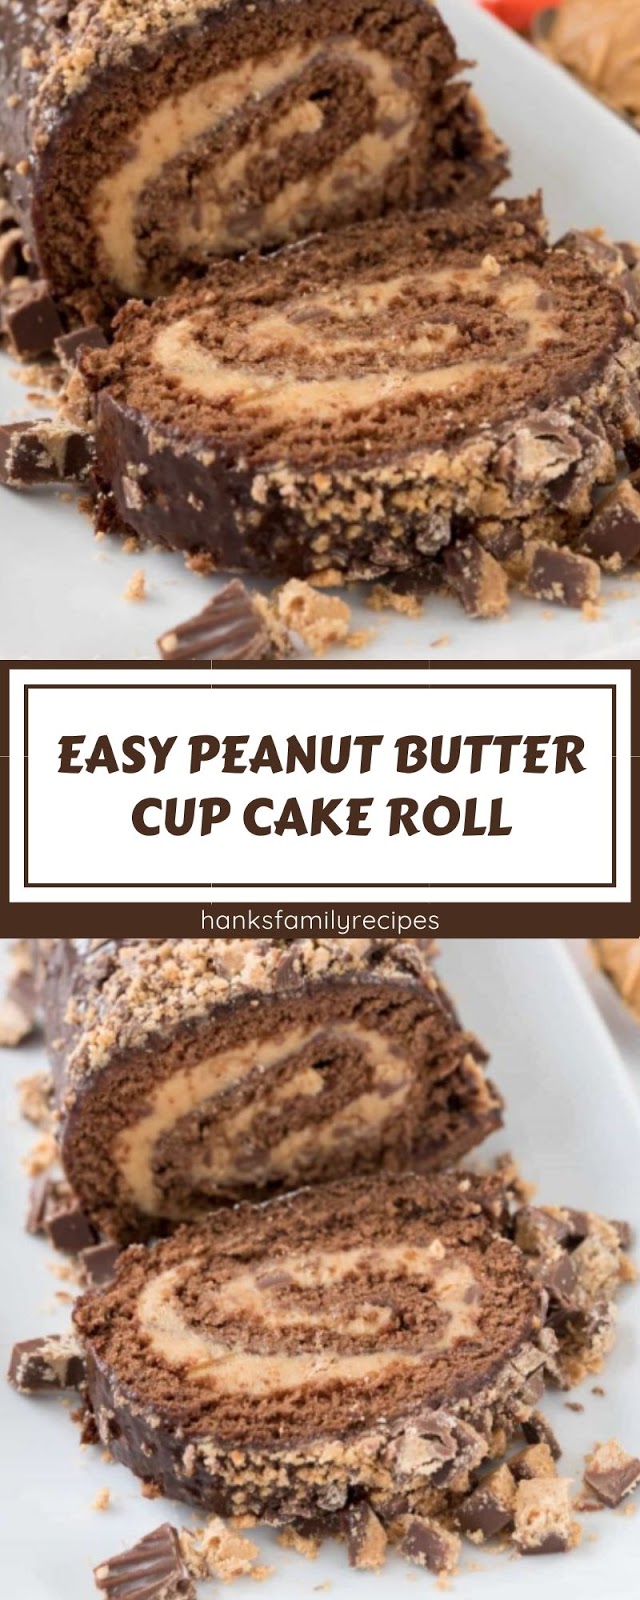 EASY PEANUT BUTTER CUP CAKE ROLL